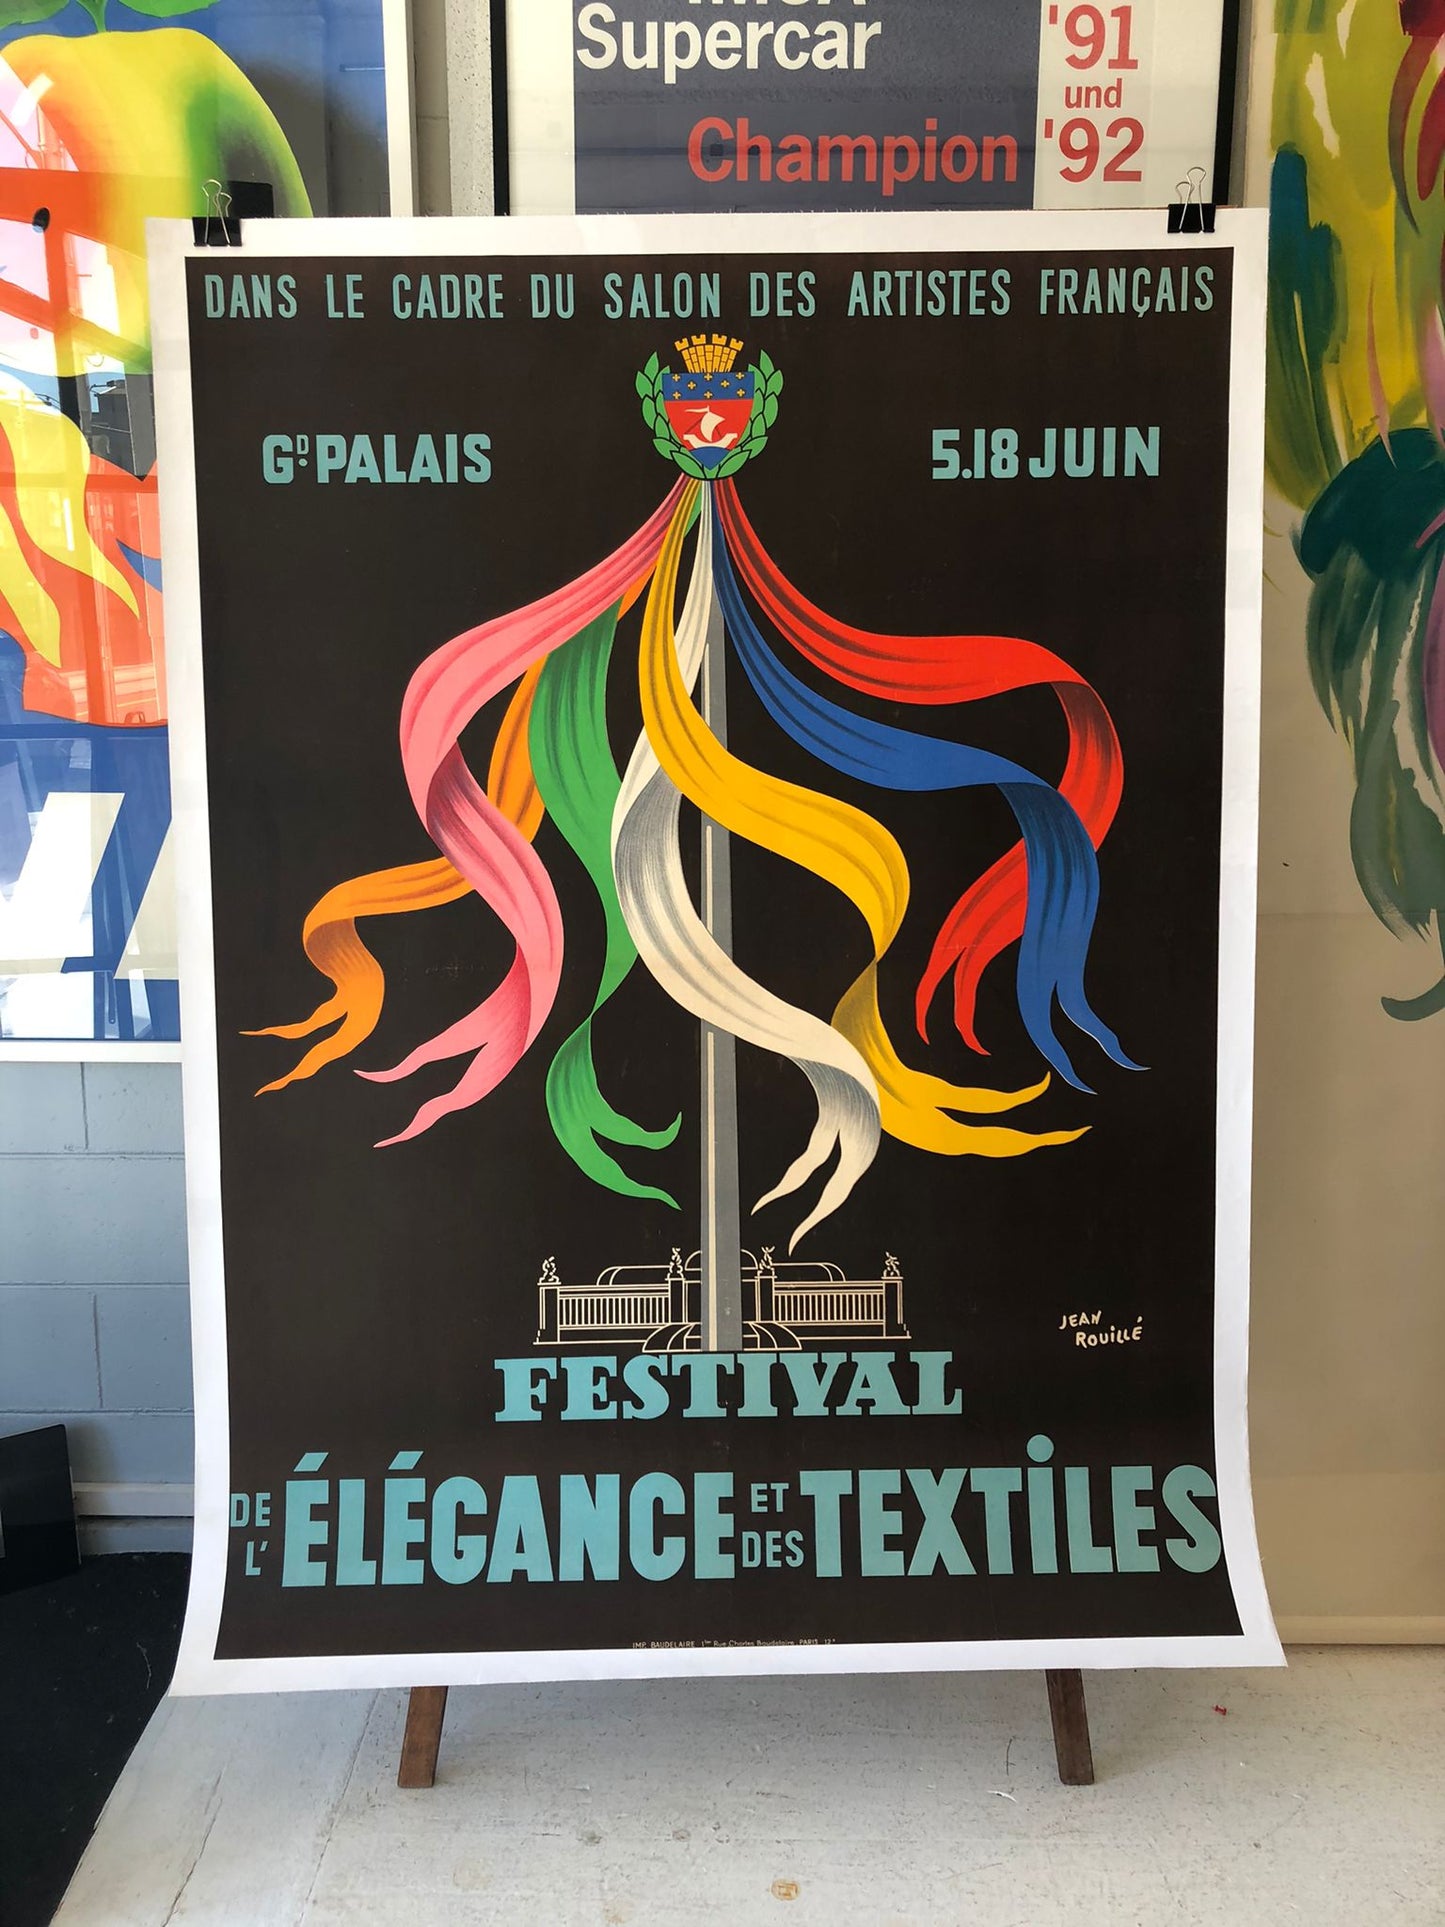 The Elegance of Textiles Festival Advertisement by Jean Rouille